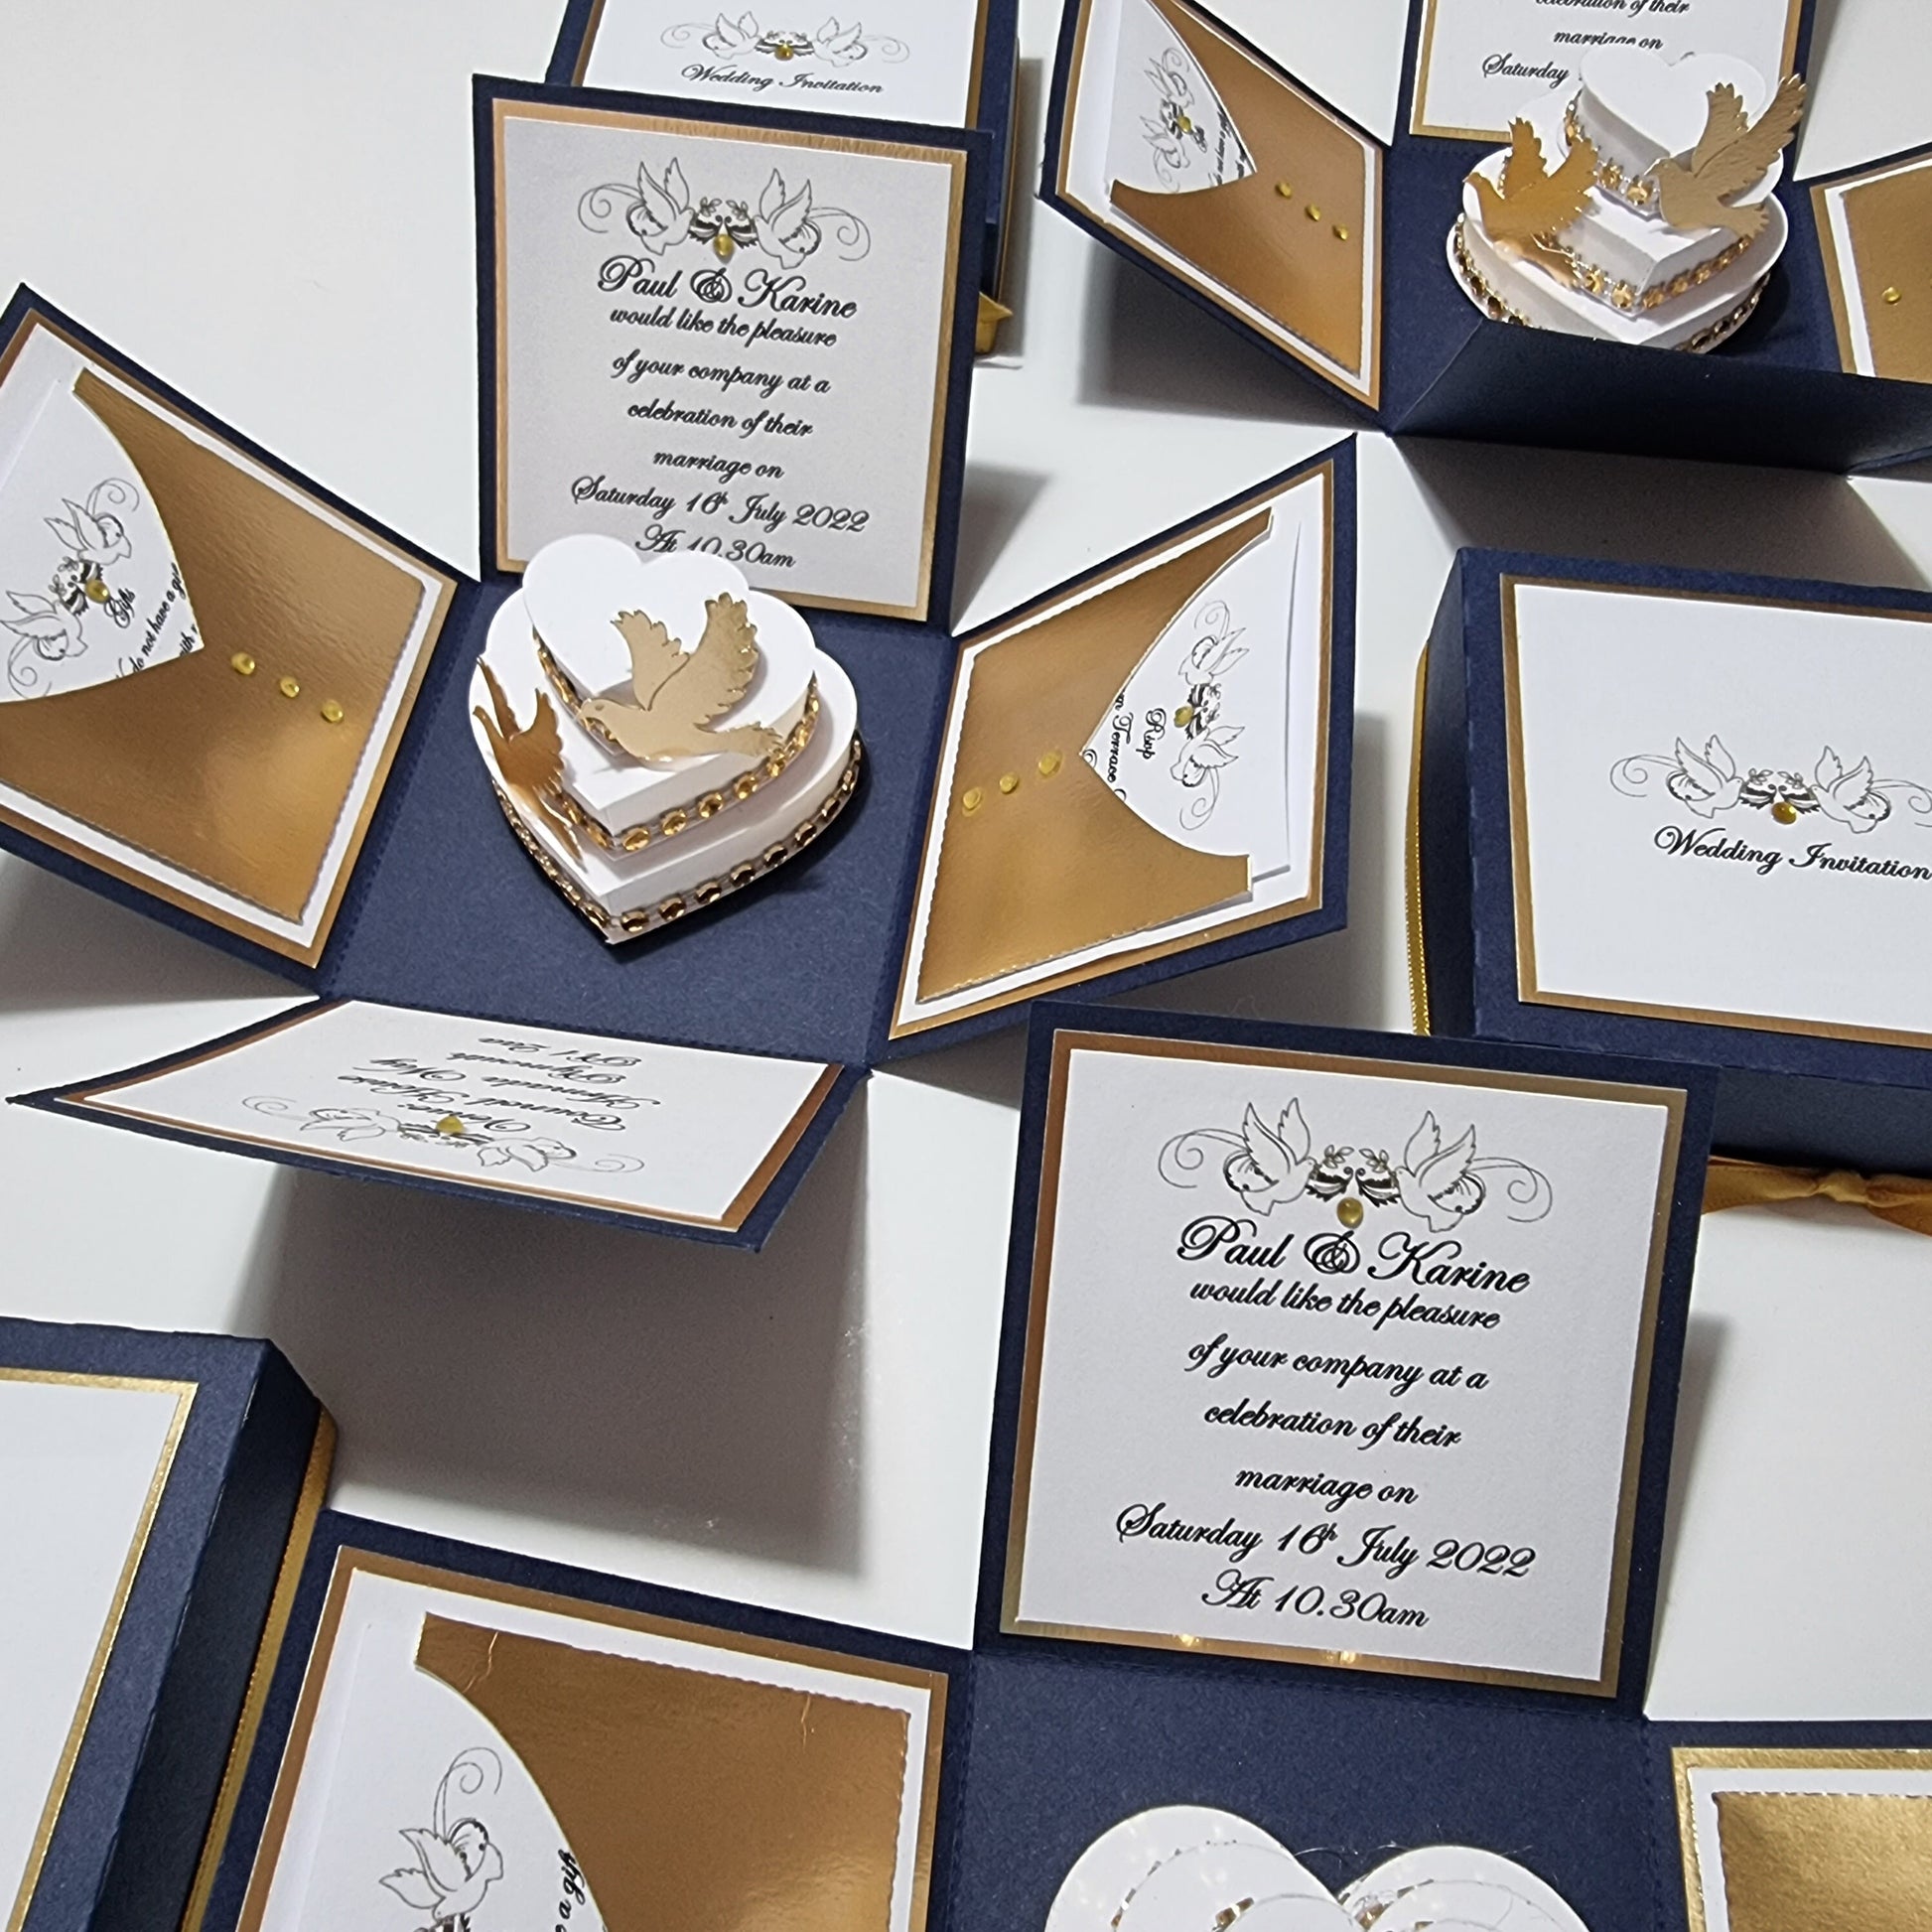 Hearts & Doves Range in Classic Navy Blue and Gold. Unique 3'' Square Exploding Wedding Invitation Box featuring two fixed panels, One with Invitation details and the other with Venue details. Dove & diamante trim details